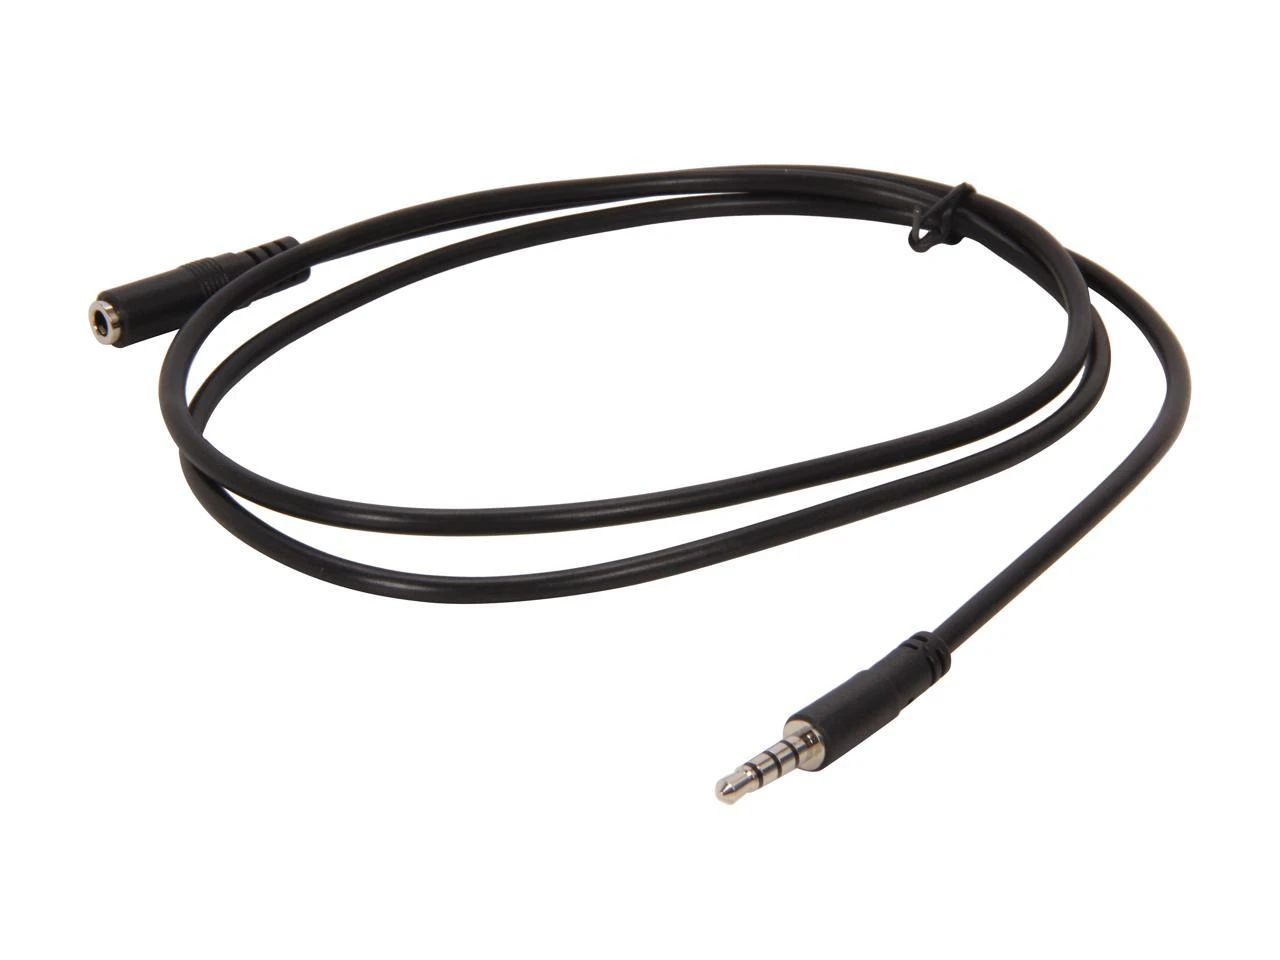 professional audio, video 4 pole 3.5mm Male to Female Stereo Audio Extension Adapter Cable